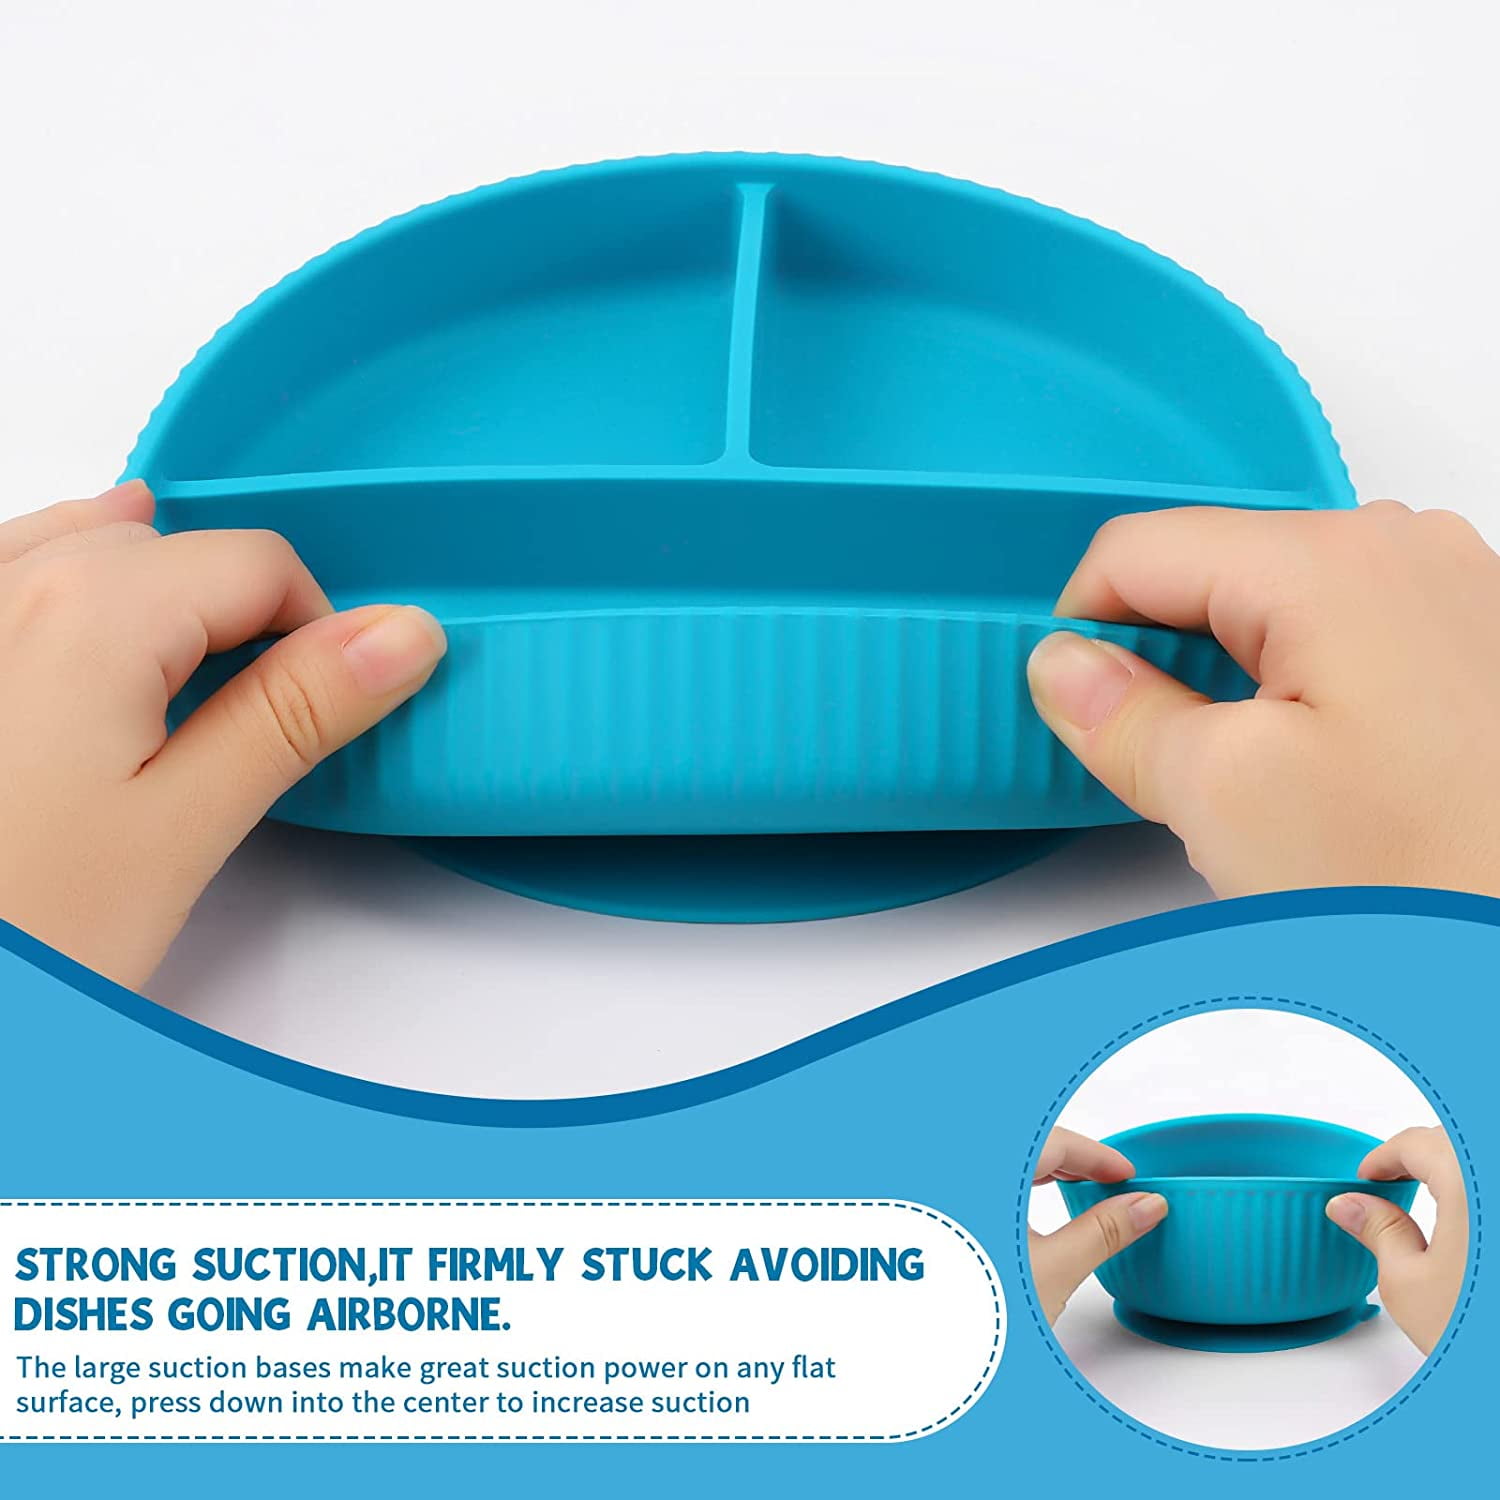 Silicone Baby Feeding Set, Baby Led Weaning Supplies with Suction Bowl  Divided Plate, Toddler Self Feeding Dish Set with Spoons Forks Sippy Cup  Adjustable Bib, Eating Utensils for 6+ Months(Blue) - Yahoo